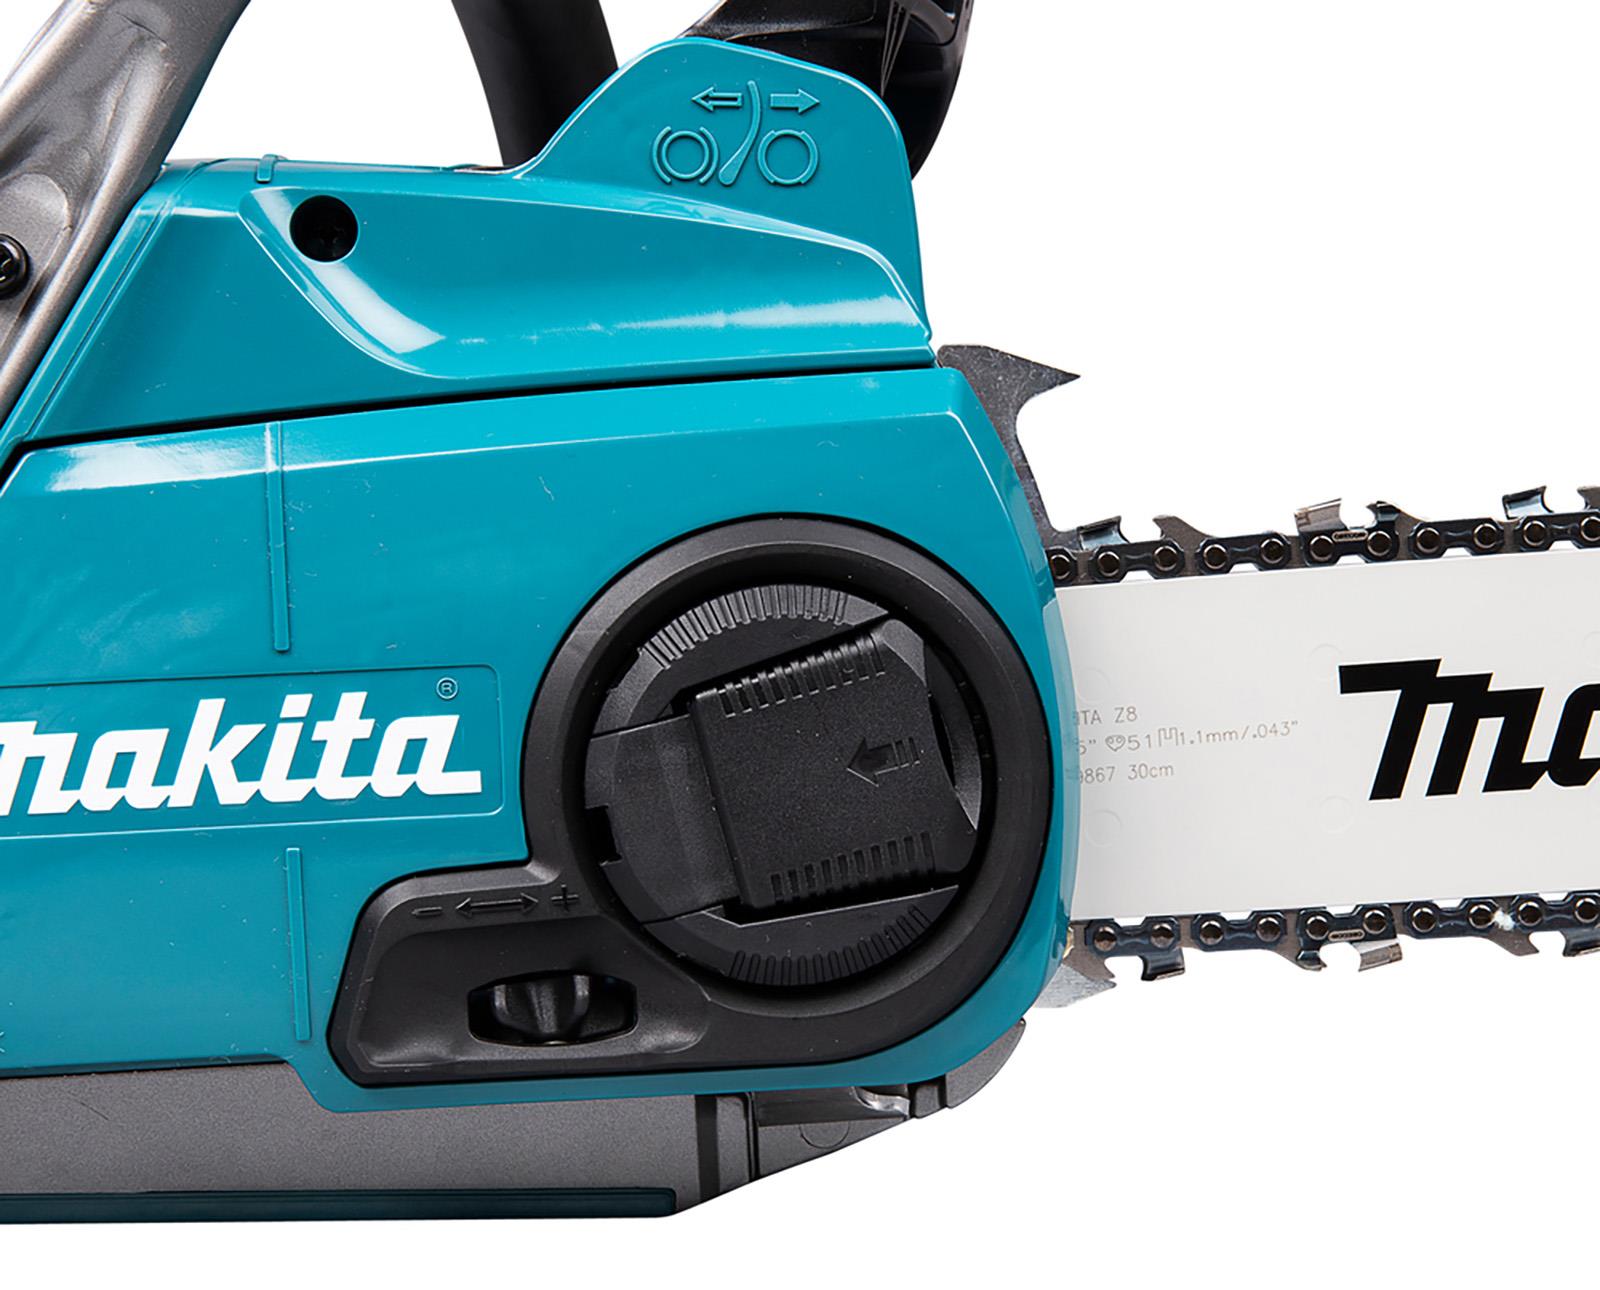 Makita Chainsaw Kit Heavy Duty 30cm 12" 40V XGT Brushless Cordless 2 x 5Ah Battery and Rapid Charger Garden Tree Cutting Pruning UC014GT201